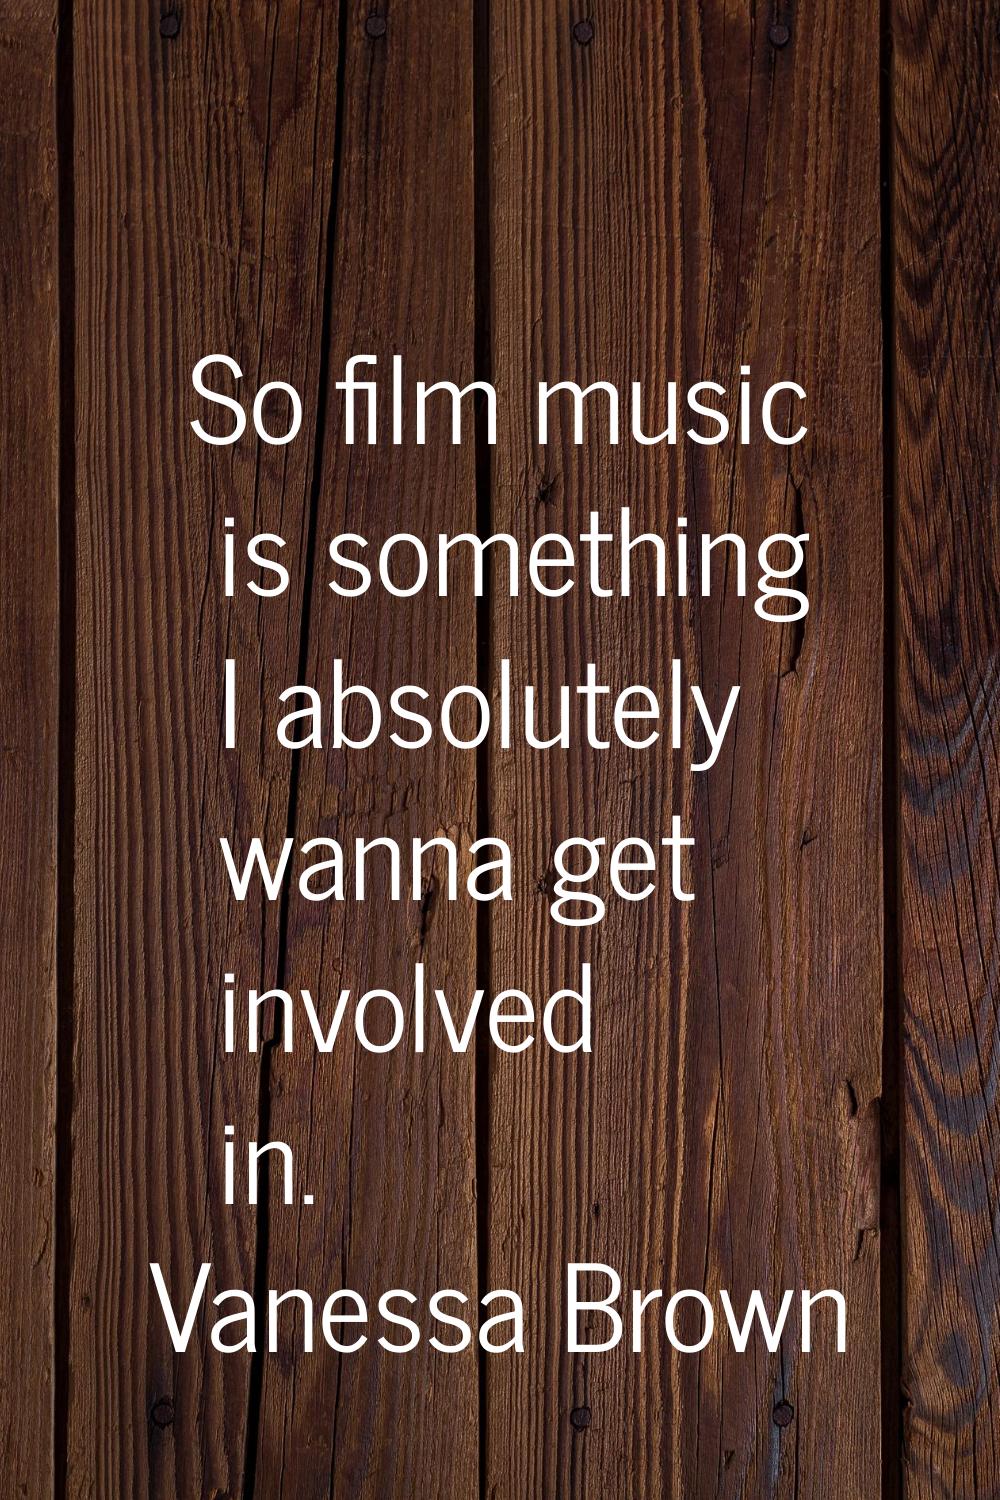 So film music is something I absolutely wanna get involved in.